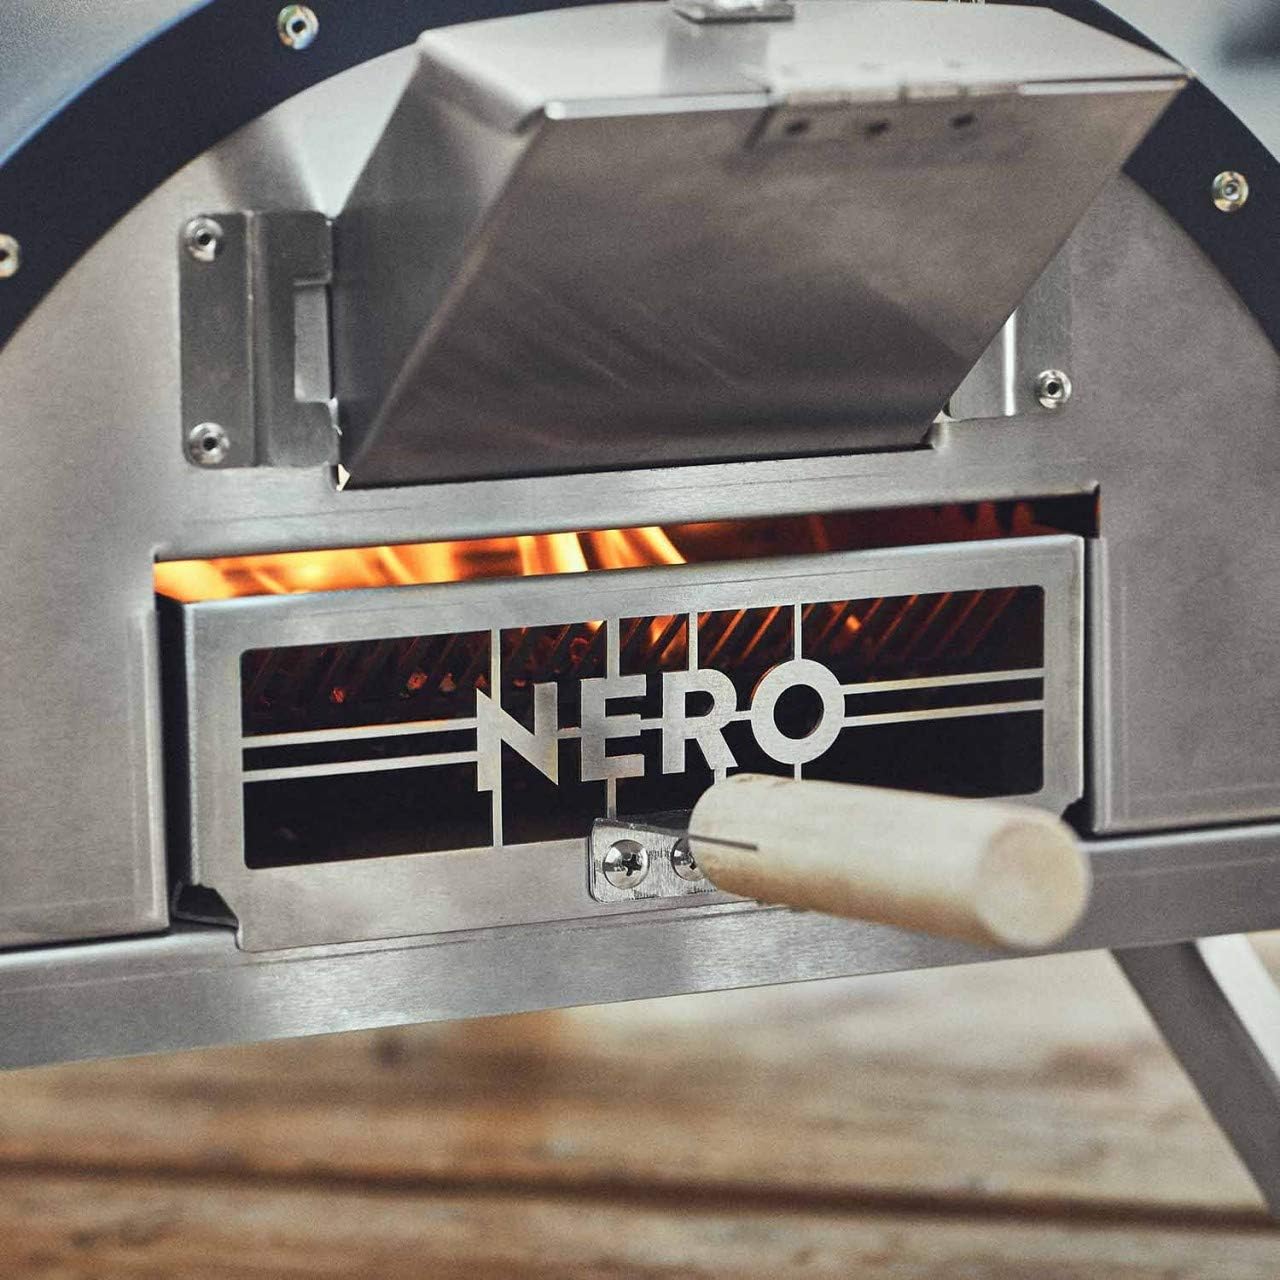 Burnhard Nero outdoor pizza oven, stainless steel, including Pizza spatula and pizza stone, high-quality pizza oven, premium wood stove suitable for the garden and outdoors, pellets, coal and briquettes.